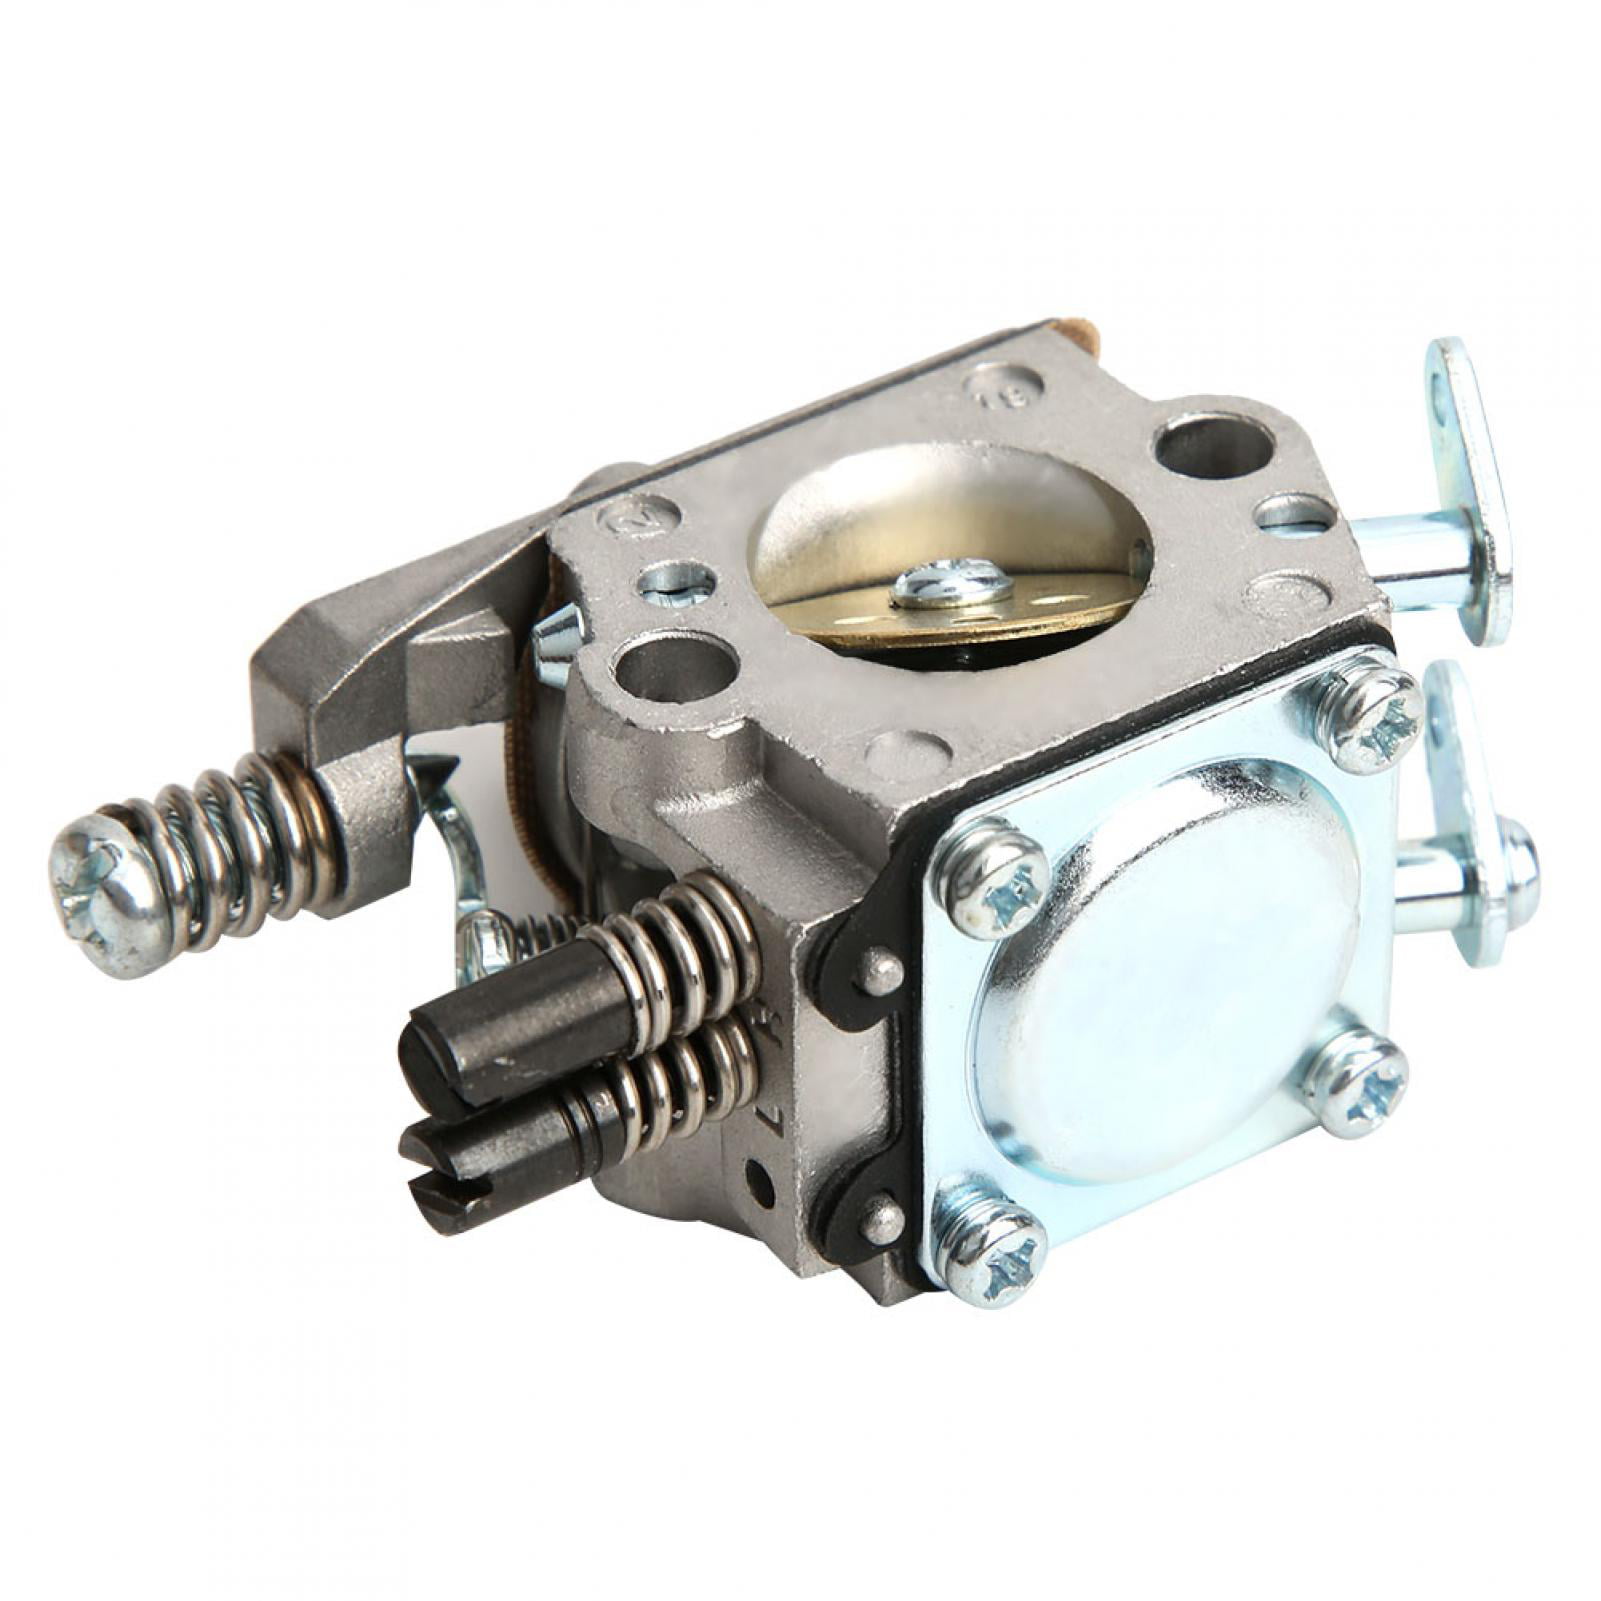 Light Weight Chainsaw Carburetor Replacement High Quality Carburetor 5200 For 